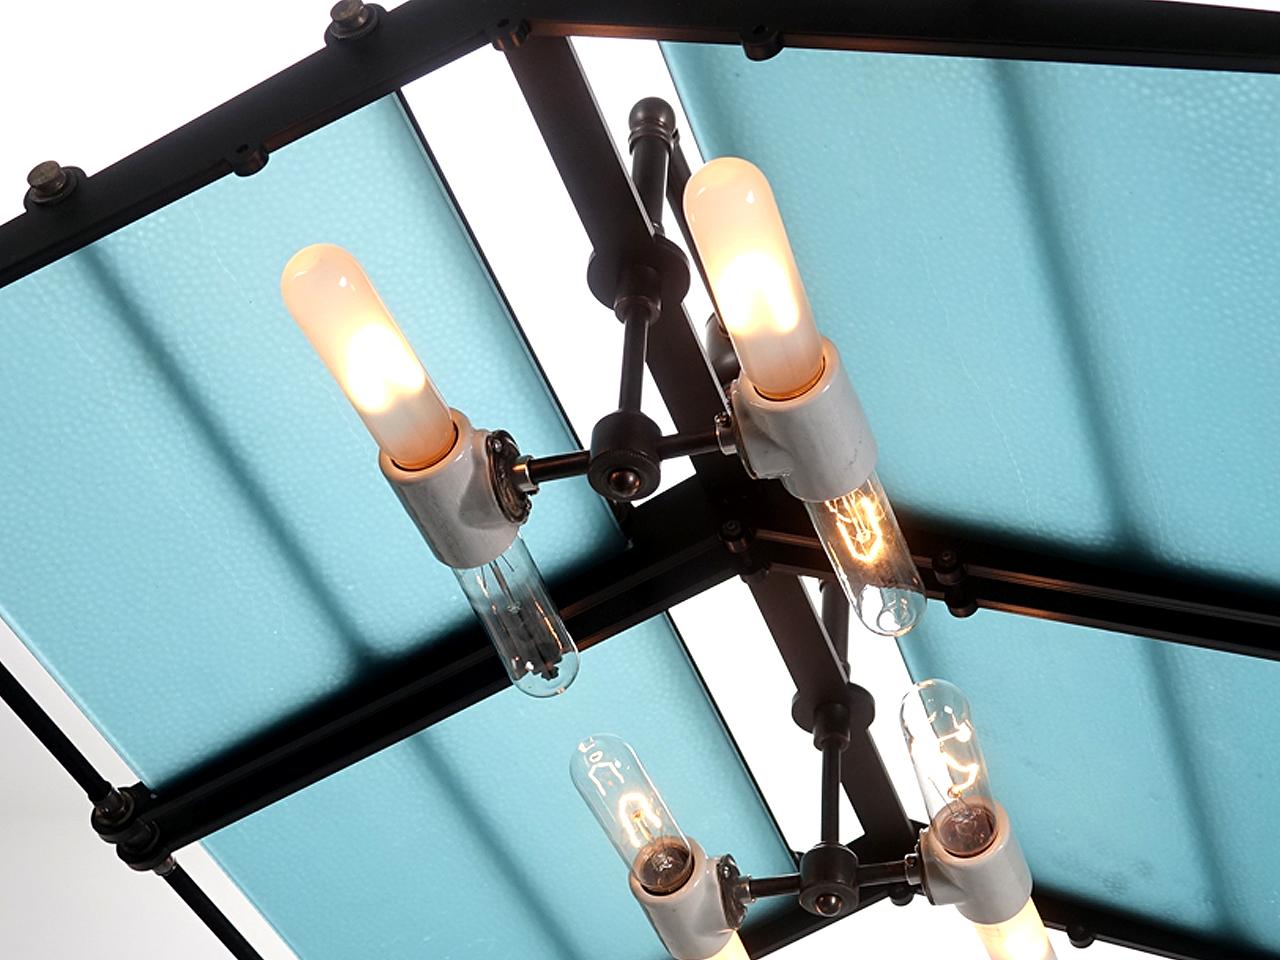 This oversized chandelier features a substantial 24 x 24 inch frame designed for the rare antique blue pebbled glass. The glass casts a beautiful 3D glow. The blackened brass and steel frame tents over four floating horizontal tubular bulbs using